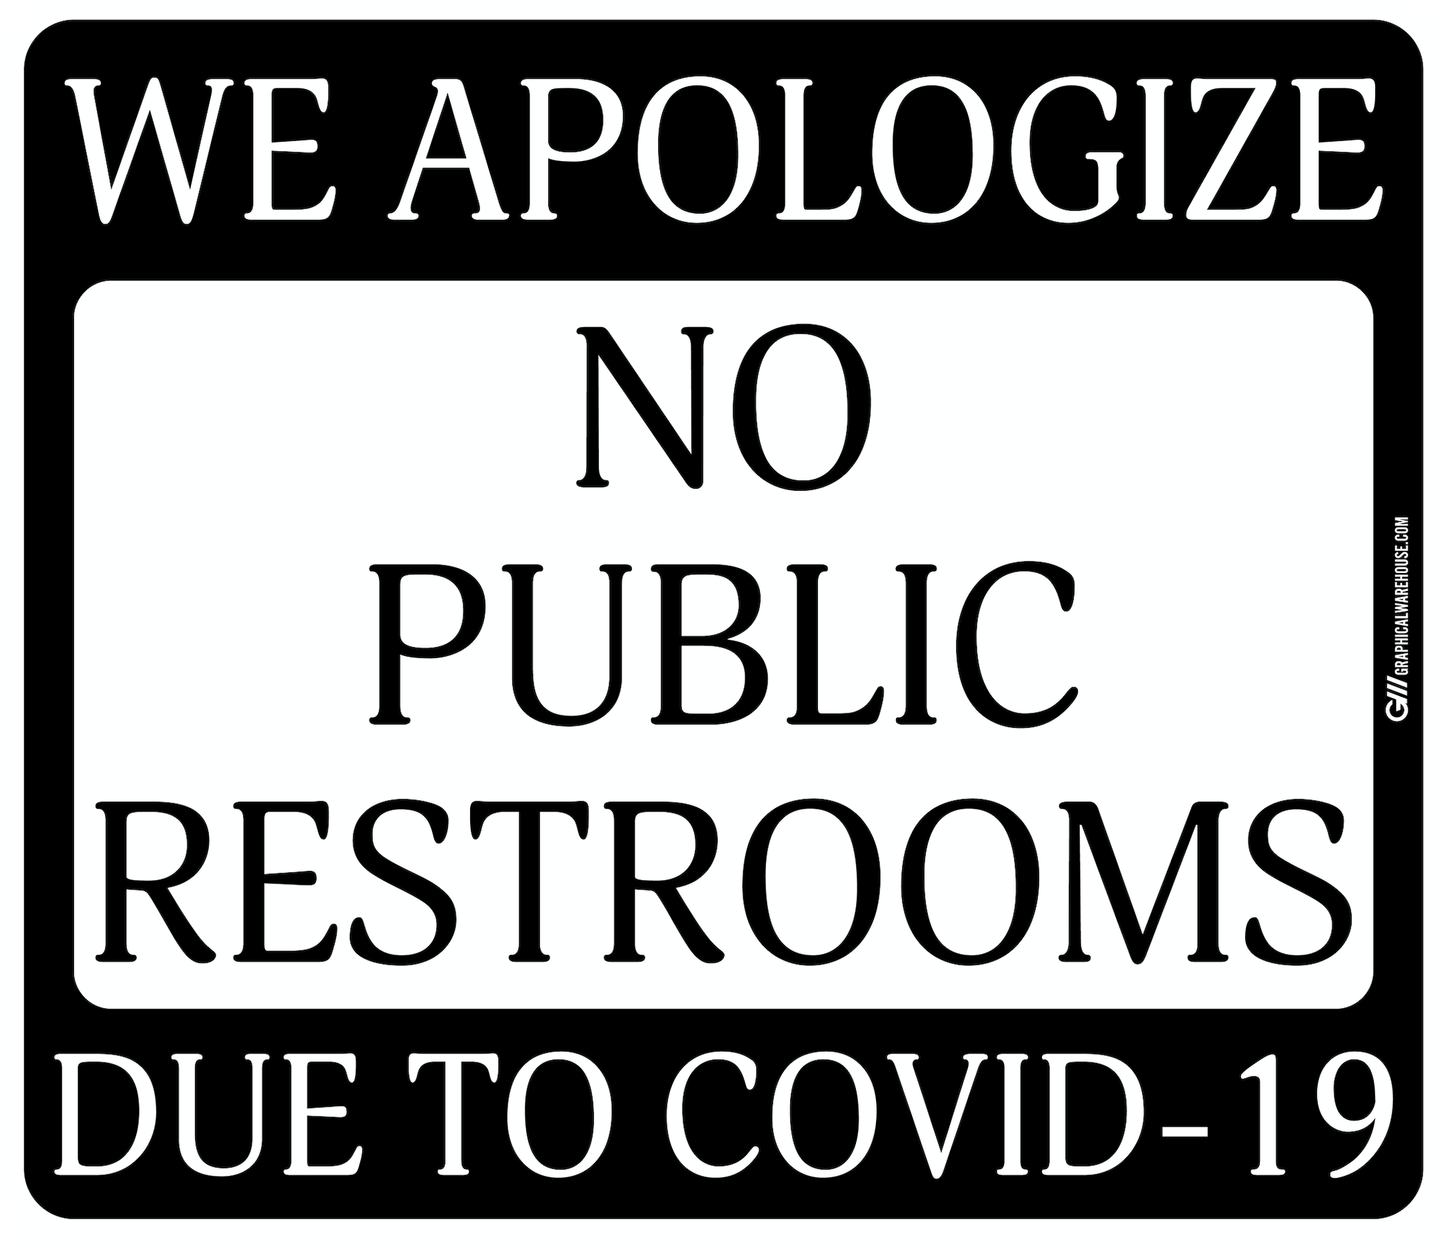 "No Public Restrooms" Adhesive Durable Vinyl Decal- Various Sizes/Colors Available